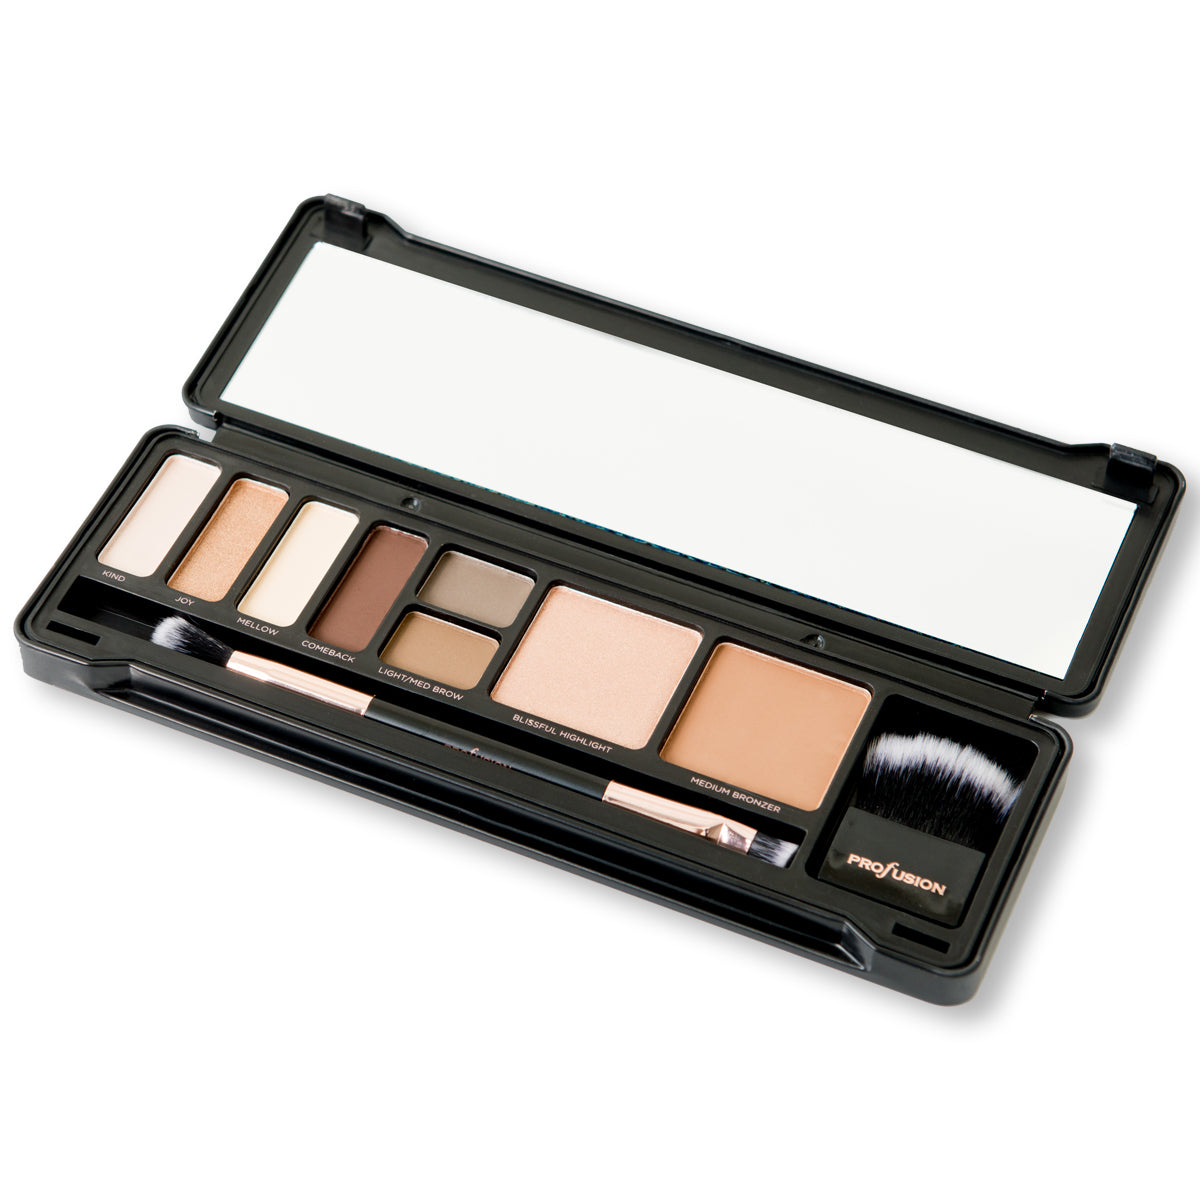 DAY FACE | Pro Makeup Case - profusion US